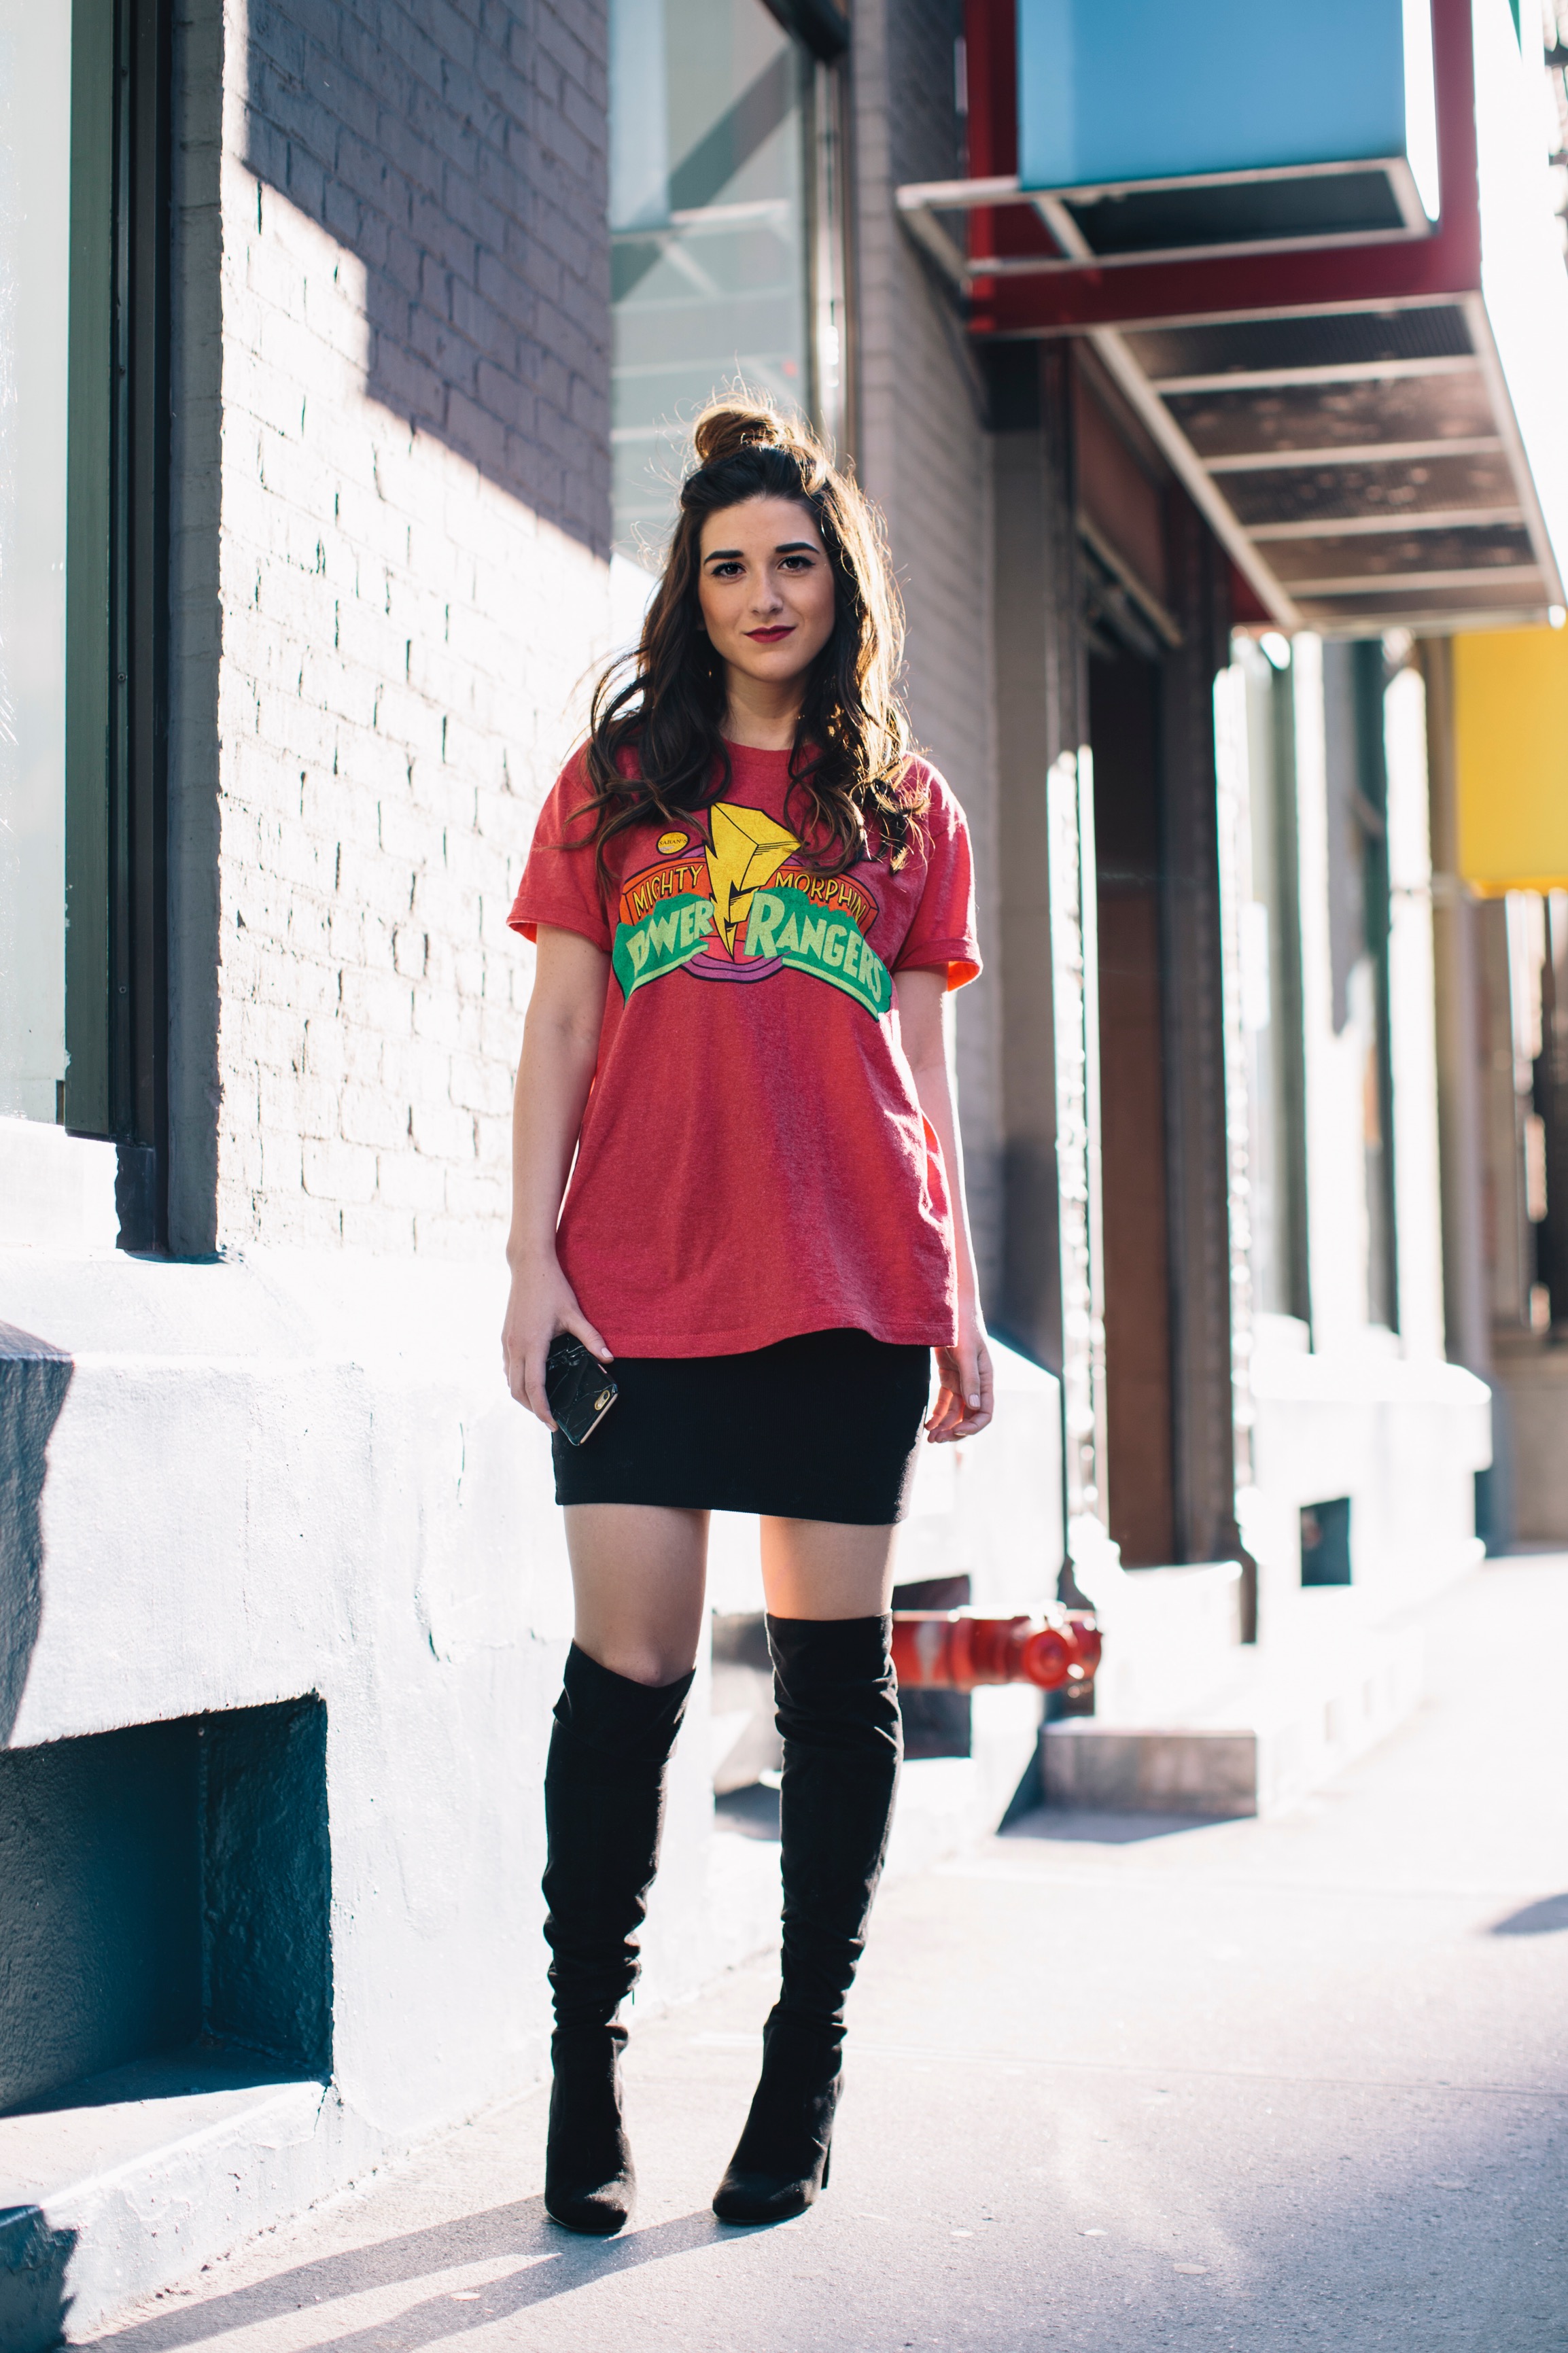 Power Rangers Tee + OTN Boots Hashtag Blogger Problems Louboutins & Love Fashion Blog Esther Santer NYC Street Style Blogger Outfit OOTD Trendy Red Top Black Mini Skirt Women Girl What To Wear Shopping Phone Hair Topknot Bun Fun Edgy Graphic T-Shirt.jpg